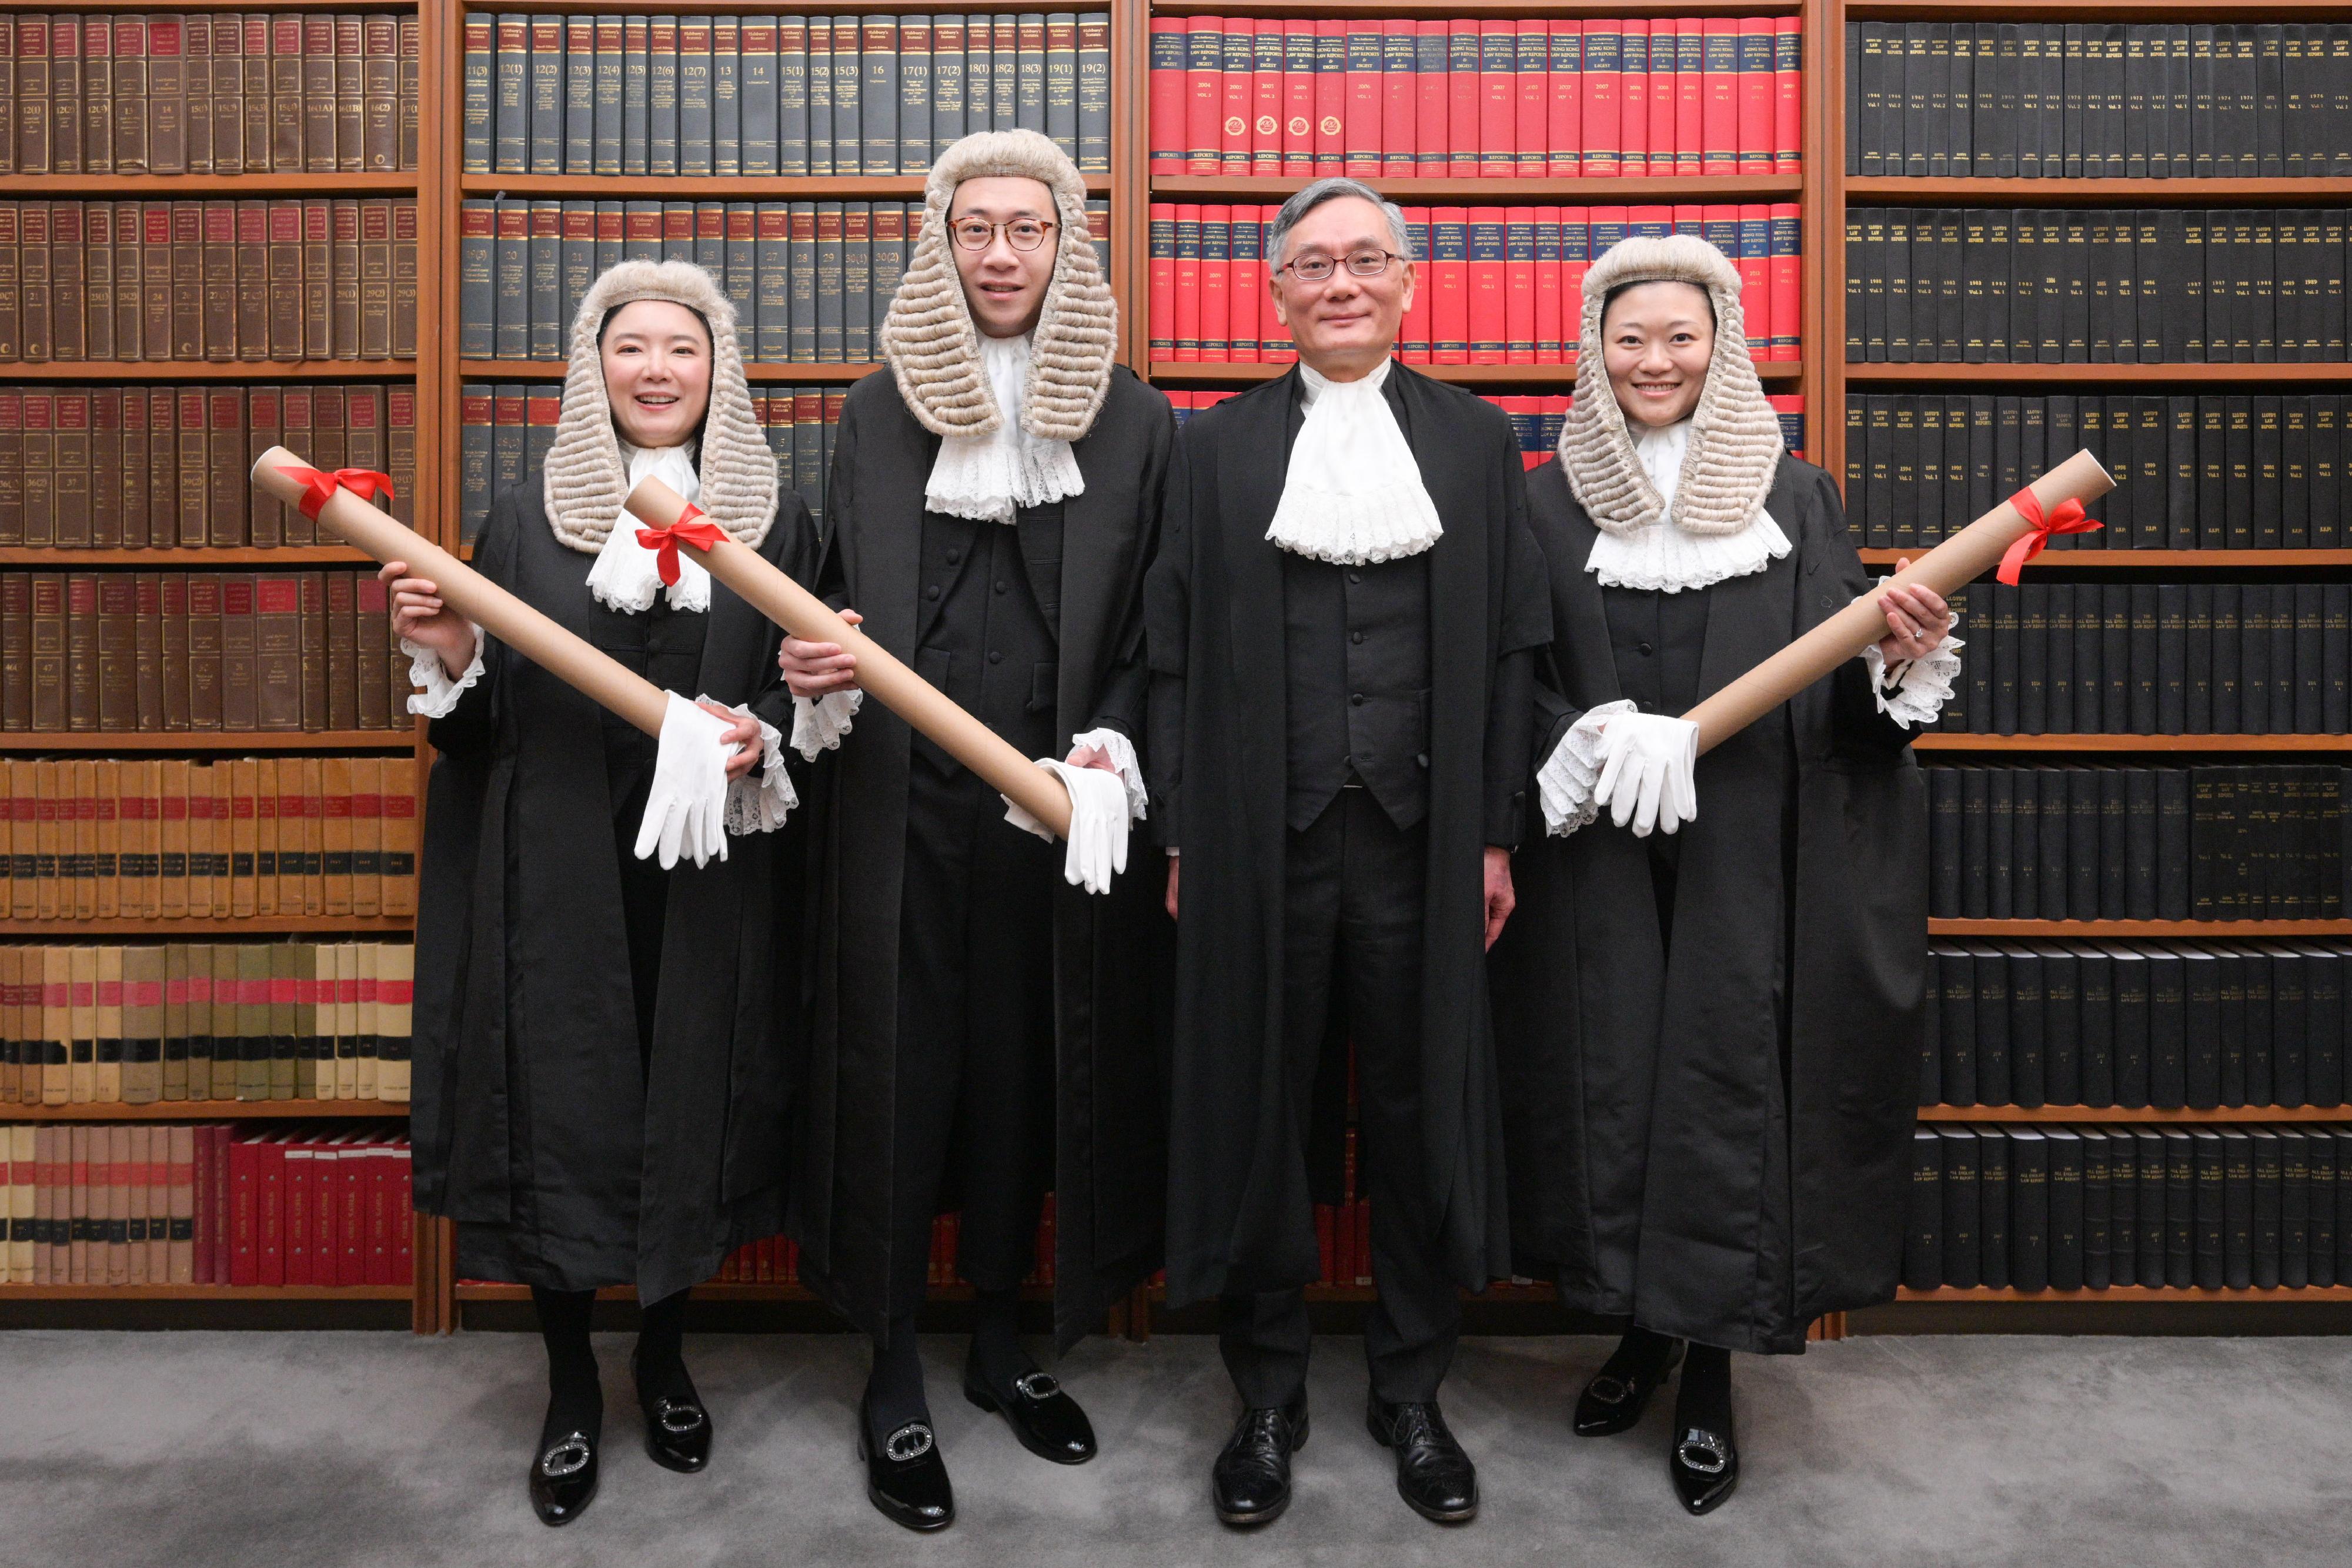 The ceremonial proceedings for the admission of newly appointed Senior Counsel took place at the Court of Final Appeal today (May 11). Photo shows Chief Justice Andrew Cheung Kui-nung, Chief Justice of the Court of Final Appeal (second right), with the newly appointed Senior Counsel Mr Benson Tsoi (second left), Ms Frances Lok (first right), and Miss Queenie Lau (first left).